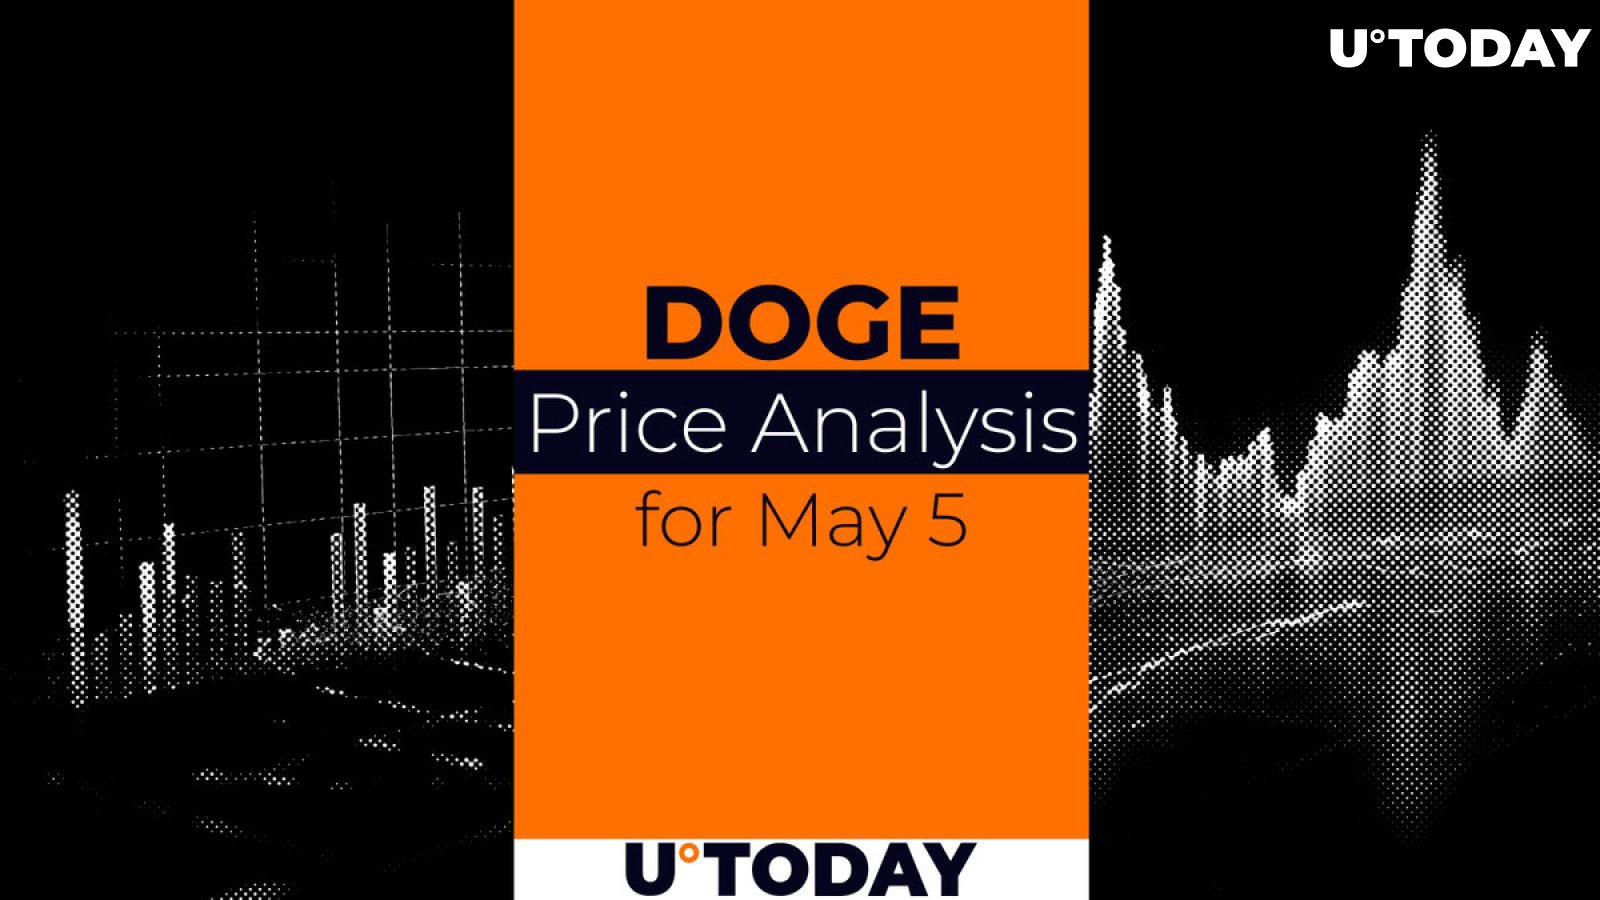 DOGE Price Prediction for May 5